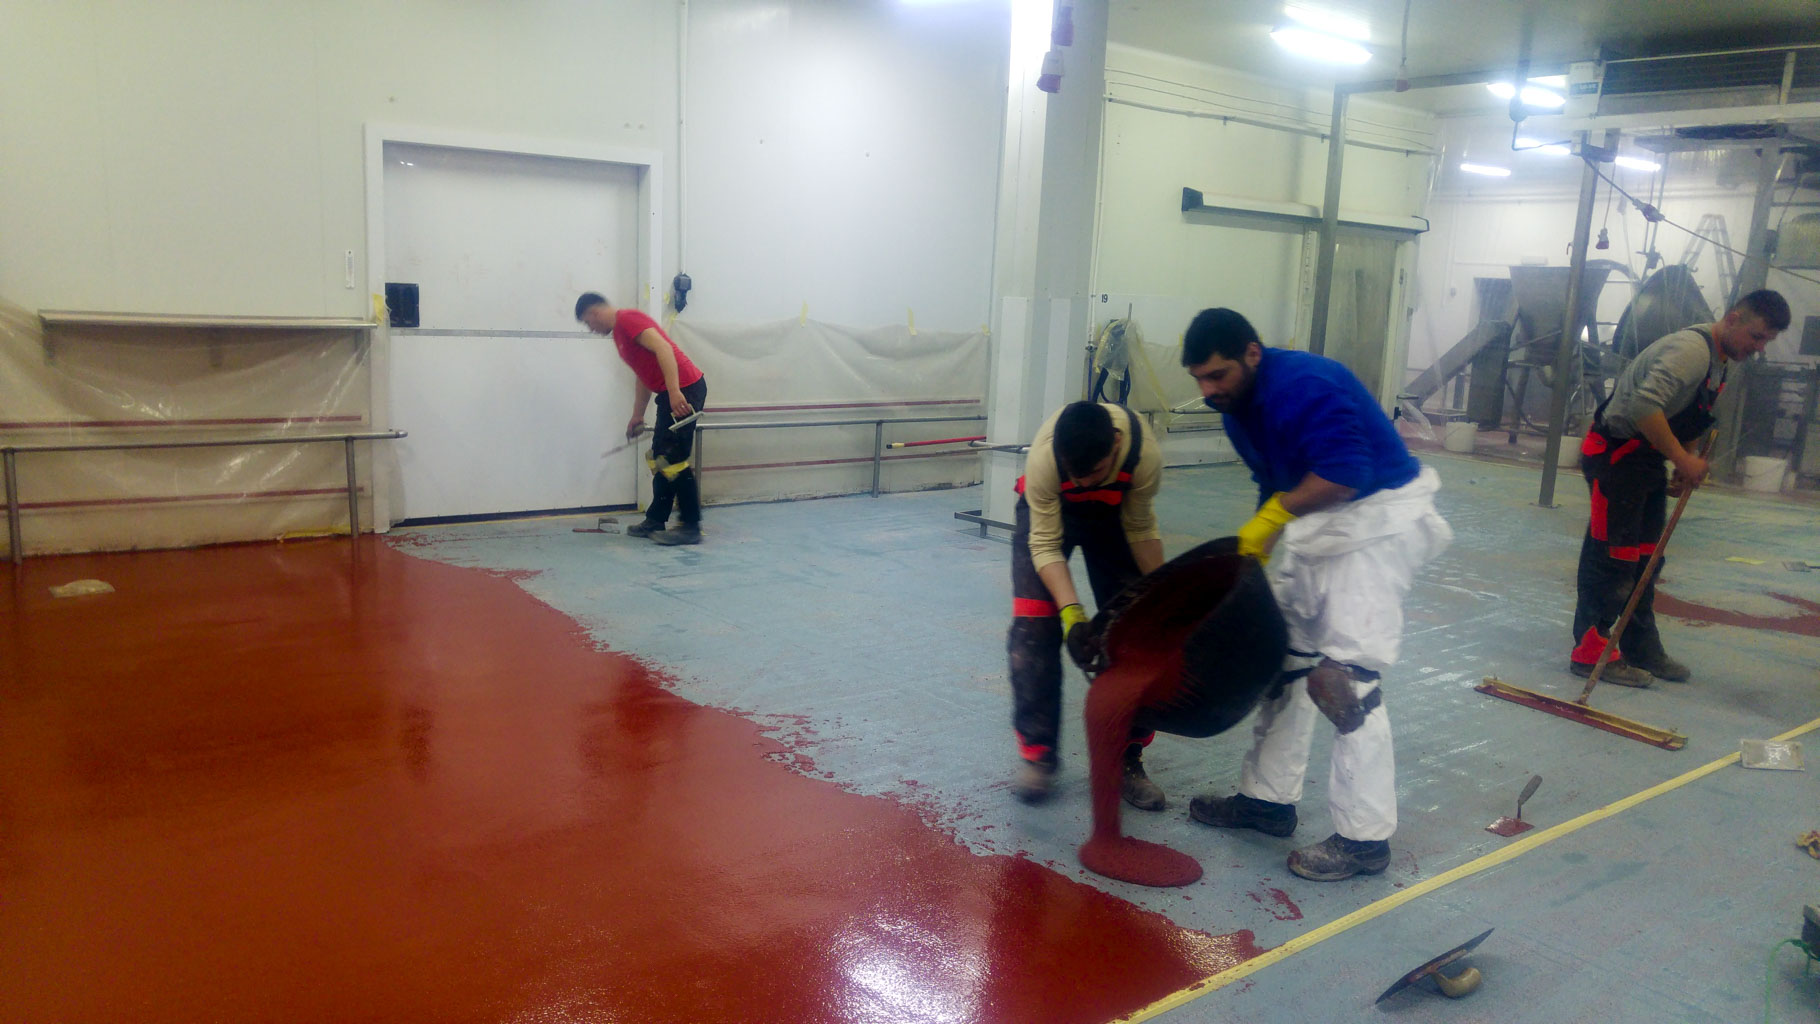 FOX - Resin Floors for Food and Beverage Production Facilities